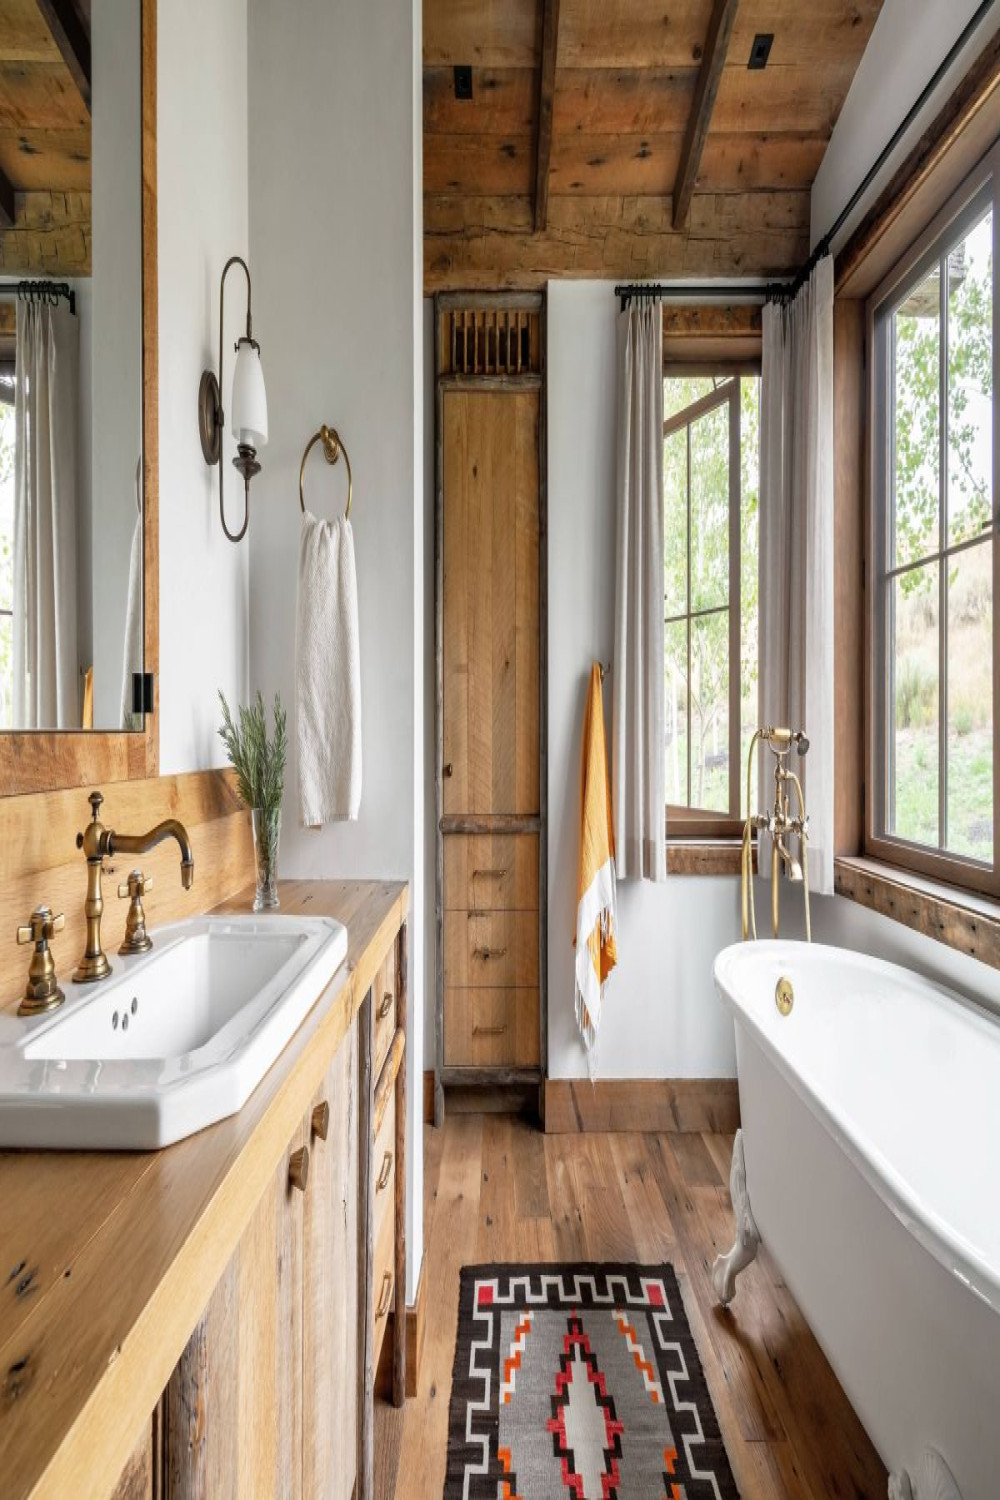 Cabin Bathrooms With Rustic Charm and Natural Style